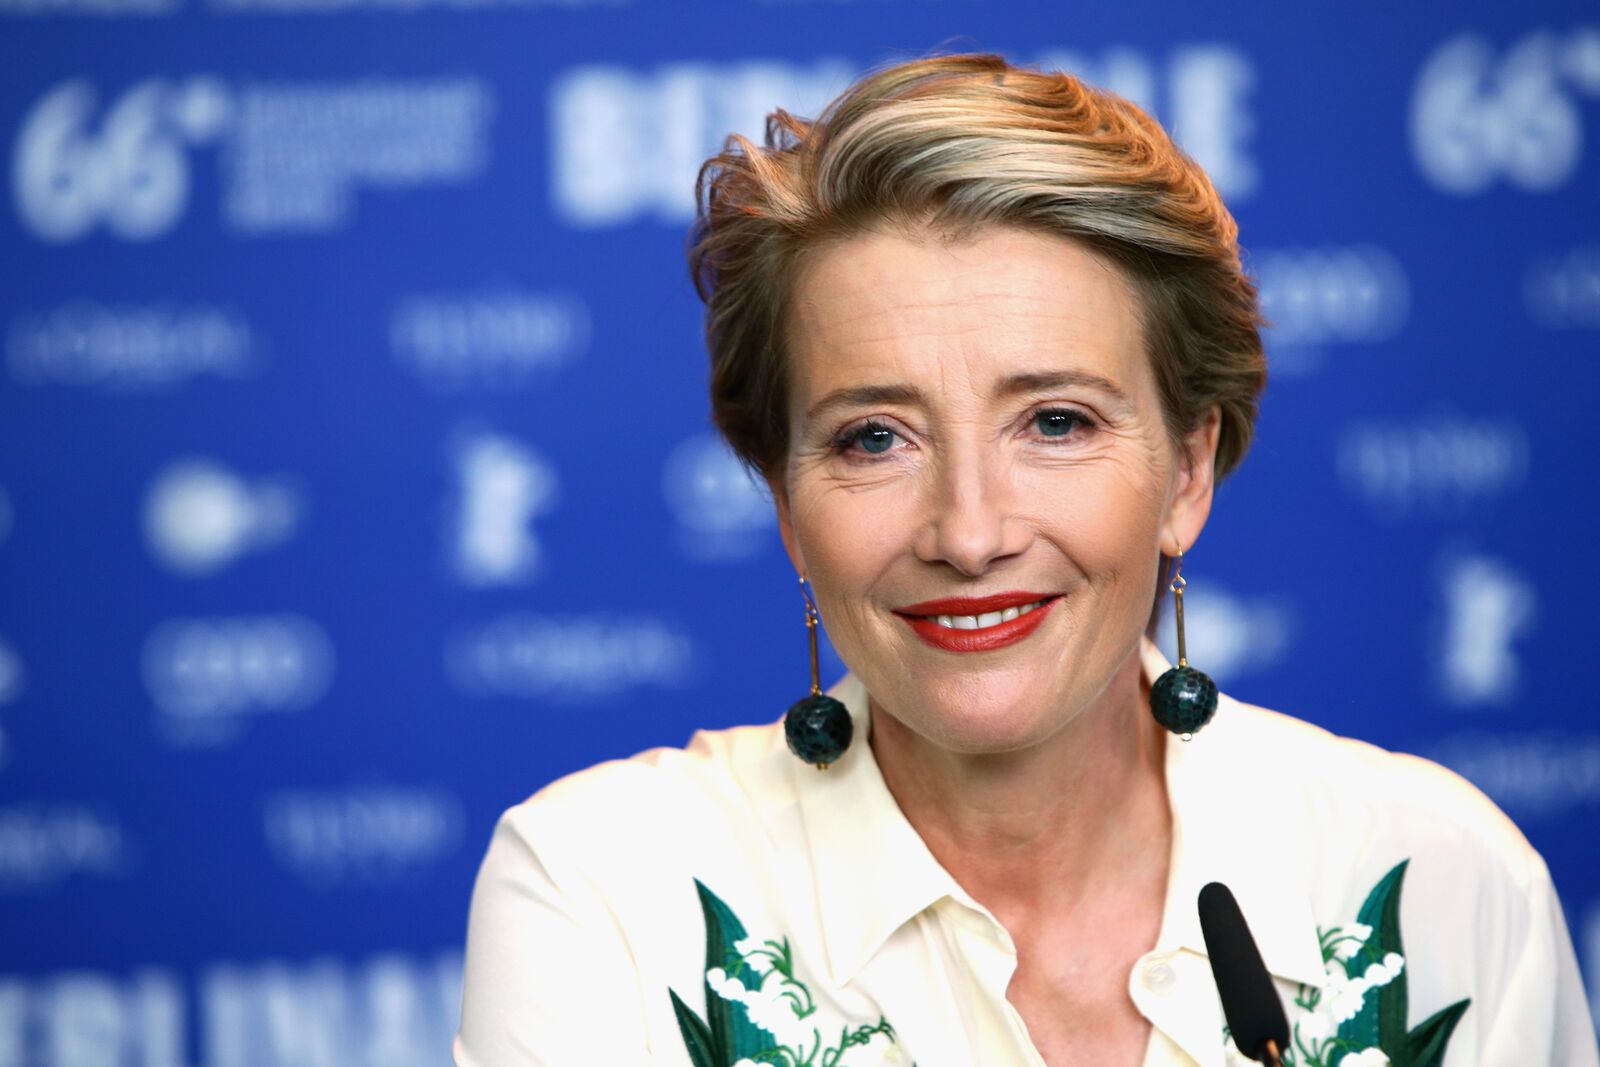 Emma Thompson at the "Alone in Berlin" press conference during the 66th Berlinale International Film Festival Berlin on February 15, 2016, in Germany | Photo: Vittorio Zunino Celotto/Getty Images